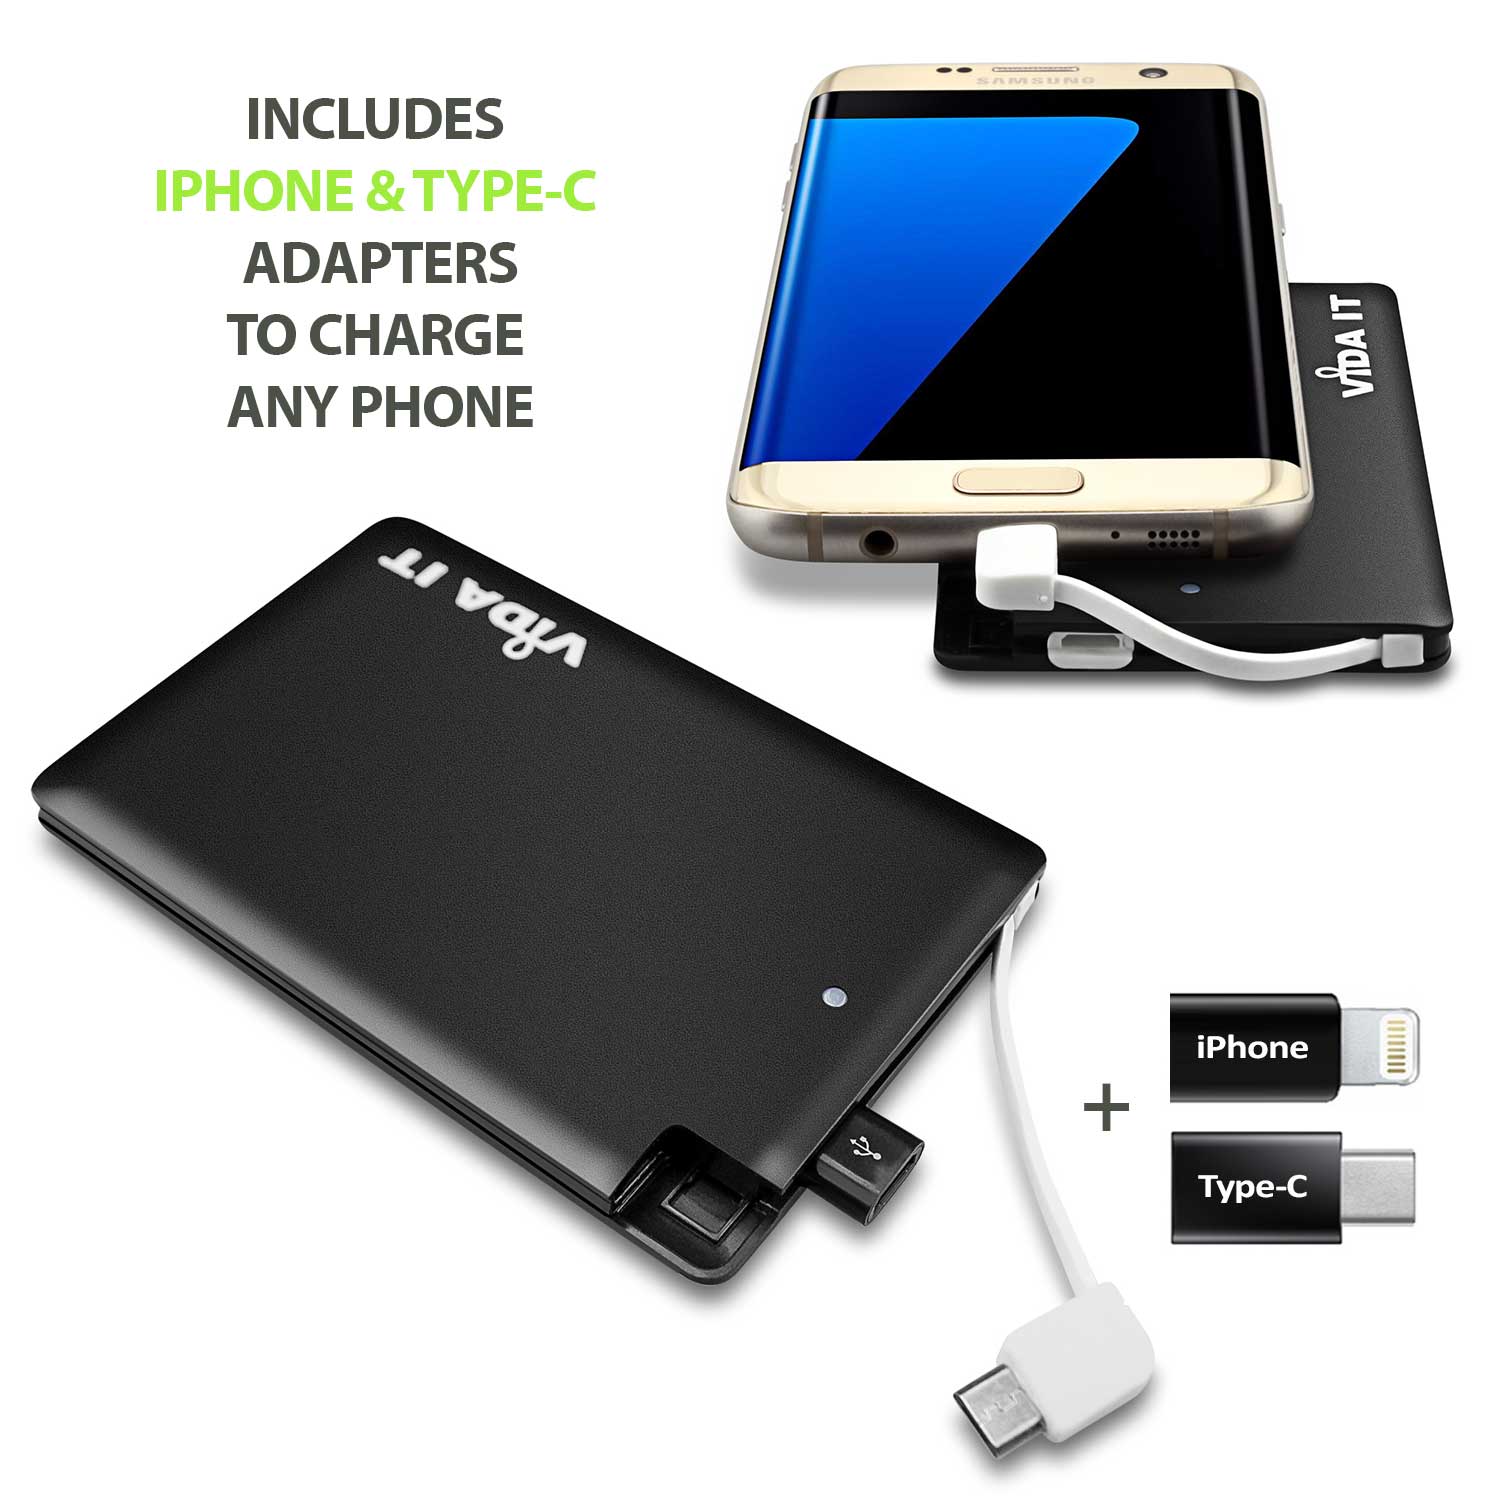 Portable Battery External PowerBank 2500mAh Charger with an integrated Micro-USB cable & iPhone Lightning and USB Type-C adapters